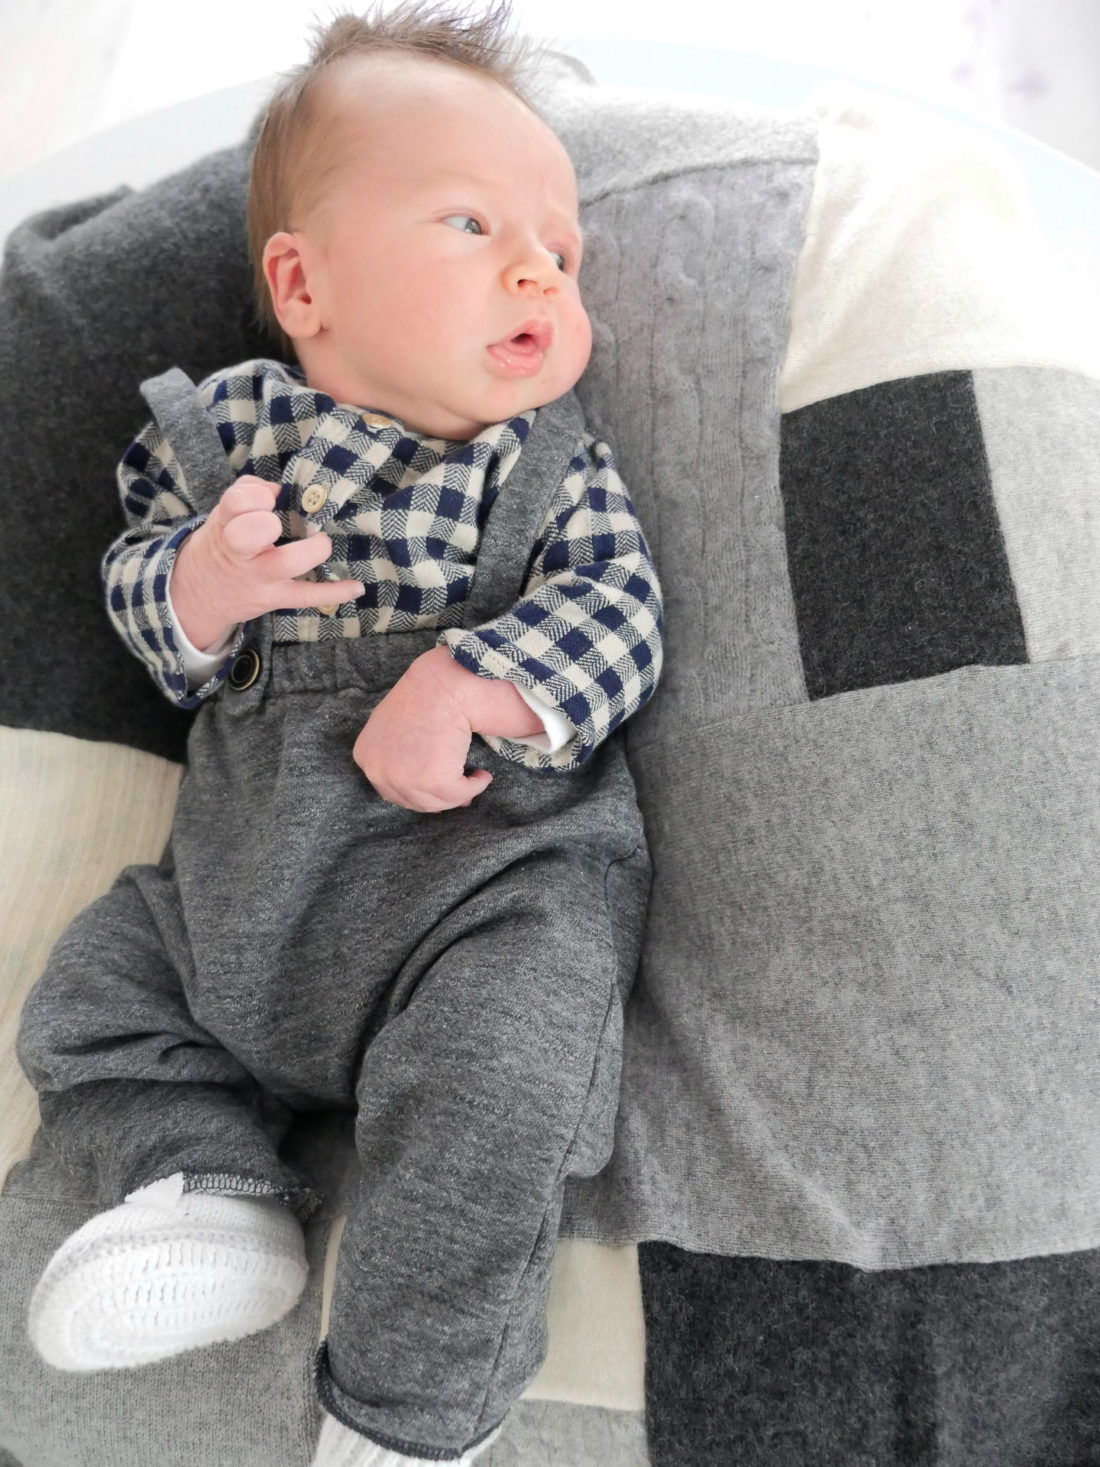 Major James Martino wearing grey overalls and a black and white checked shirt laying on a grey patchwork cashmere blanket